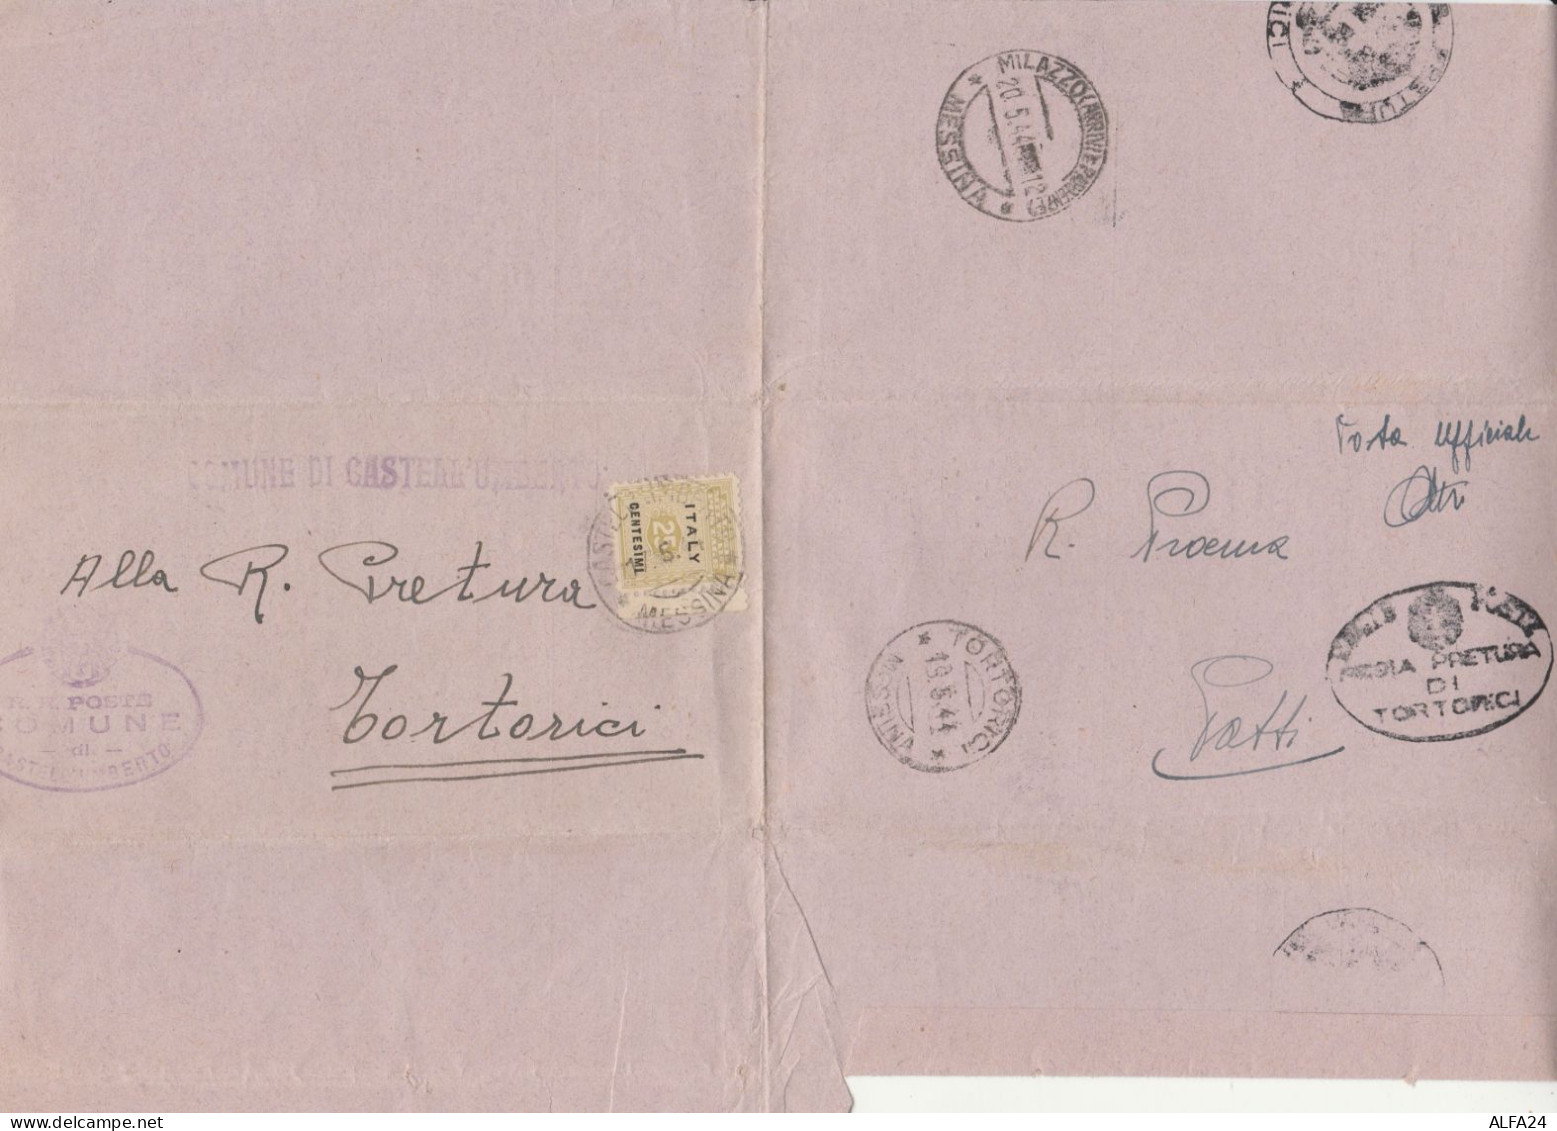 LETTERA 1944 C.25 ALLIED MILITARY POSTAGE TIMBRO TORTORICI MESSINA MILAZZO (RY3868 - Britisch-am. Bes.: Sizilien